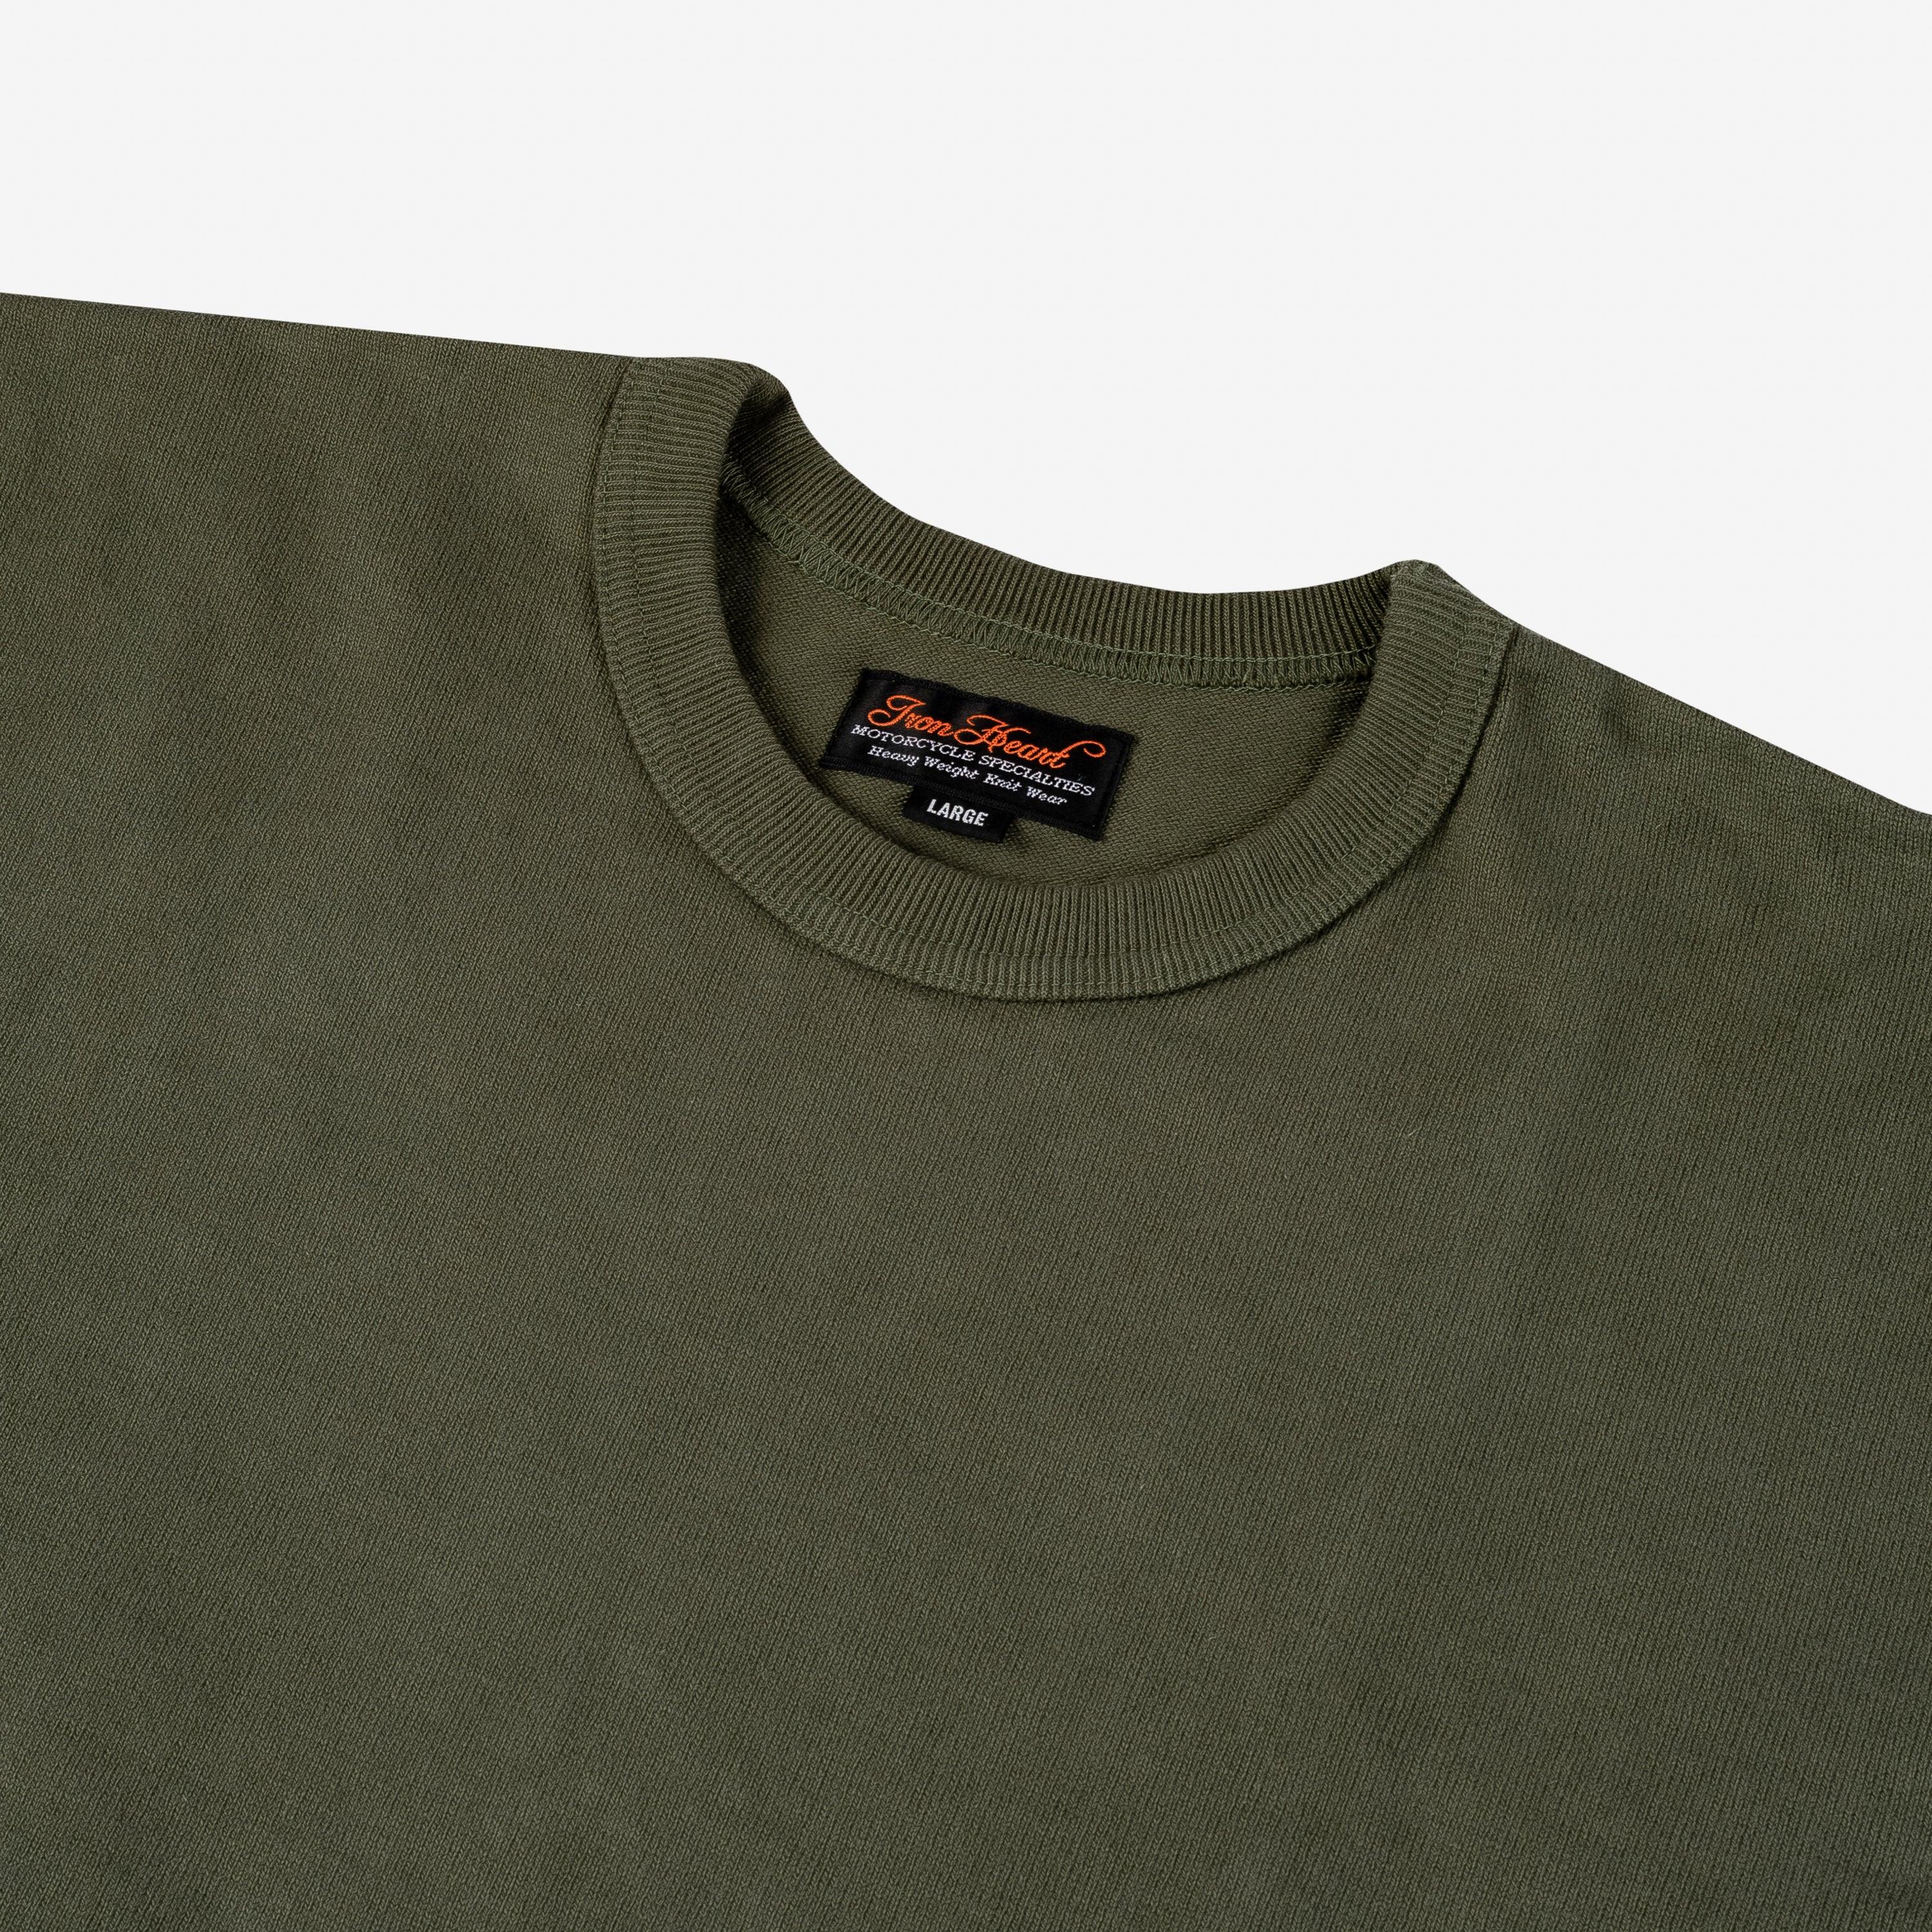 Iron Heart IHTL-1501-OLV 11oz Cotton Knit Long Sleeved Crew Neck Sweater - Olive - Guilty Party